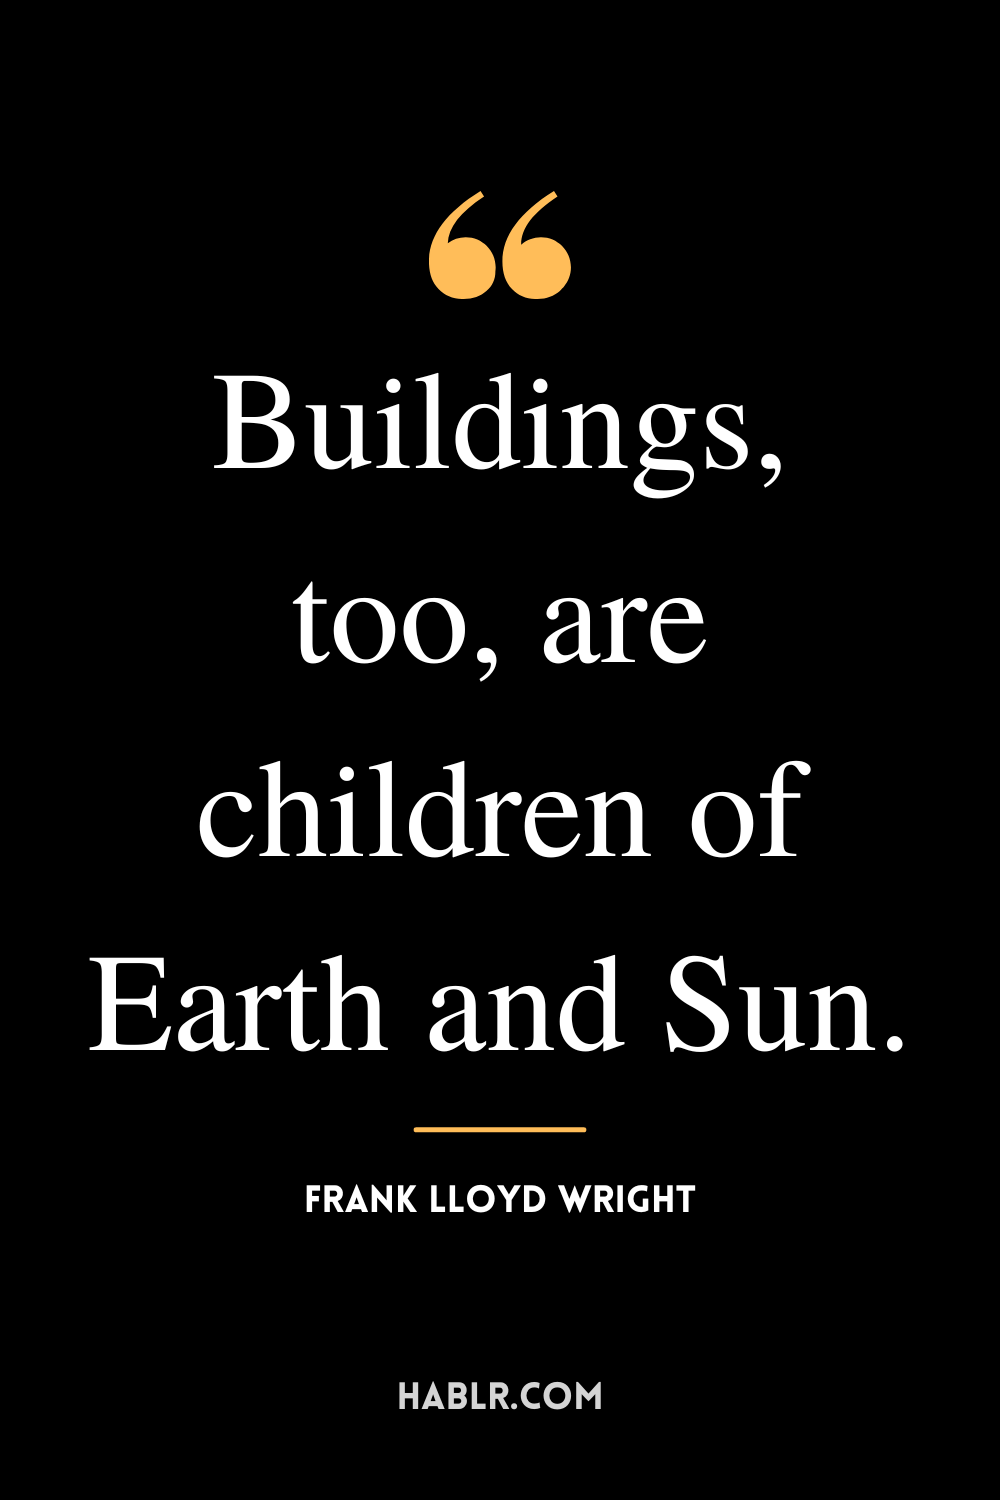 "Buildings, too, are children of Earth and Sun." -Frank Lloyd Wright